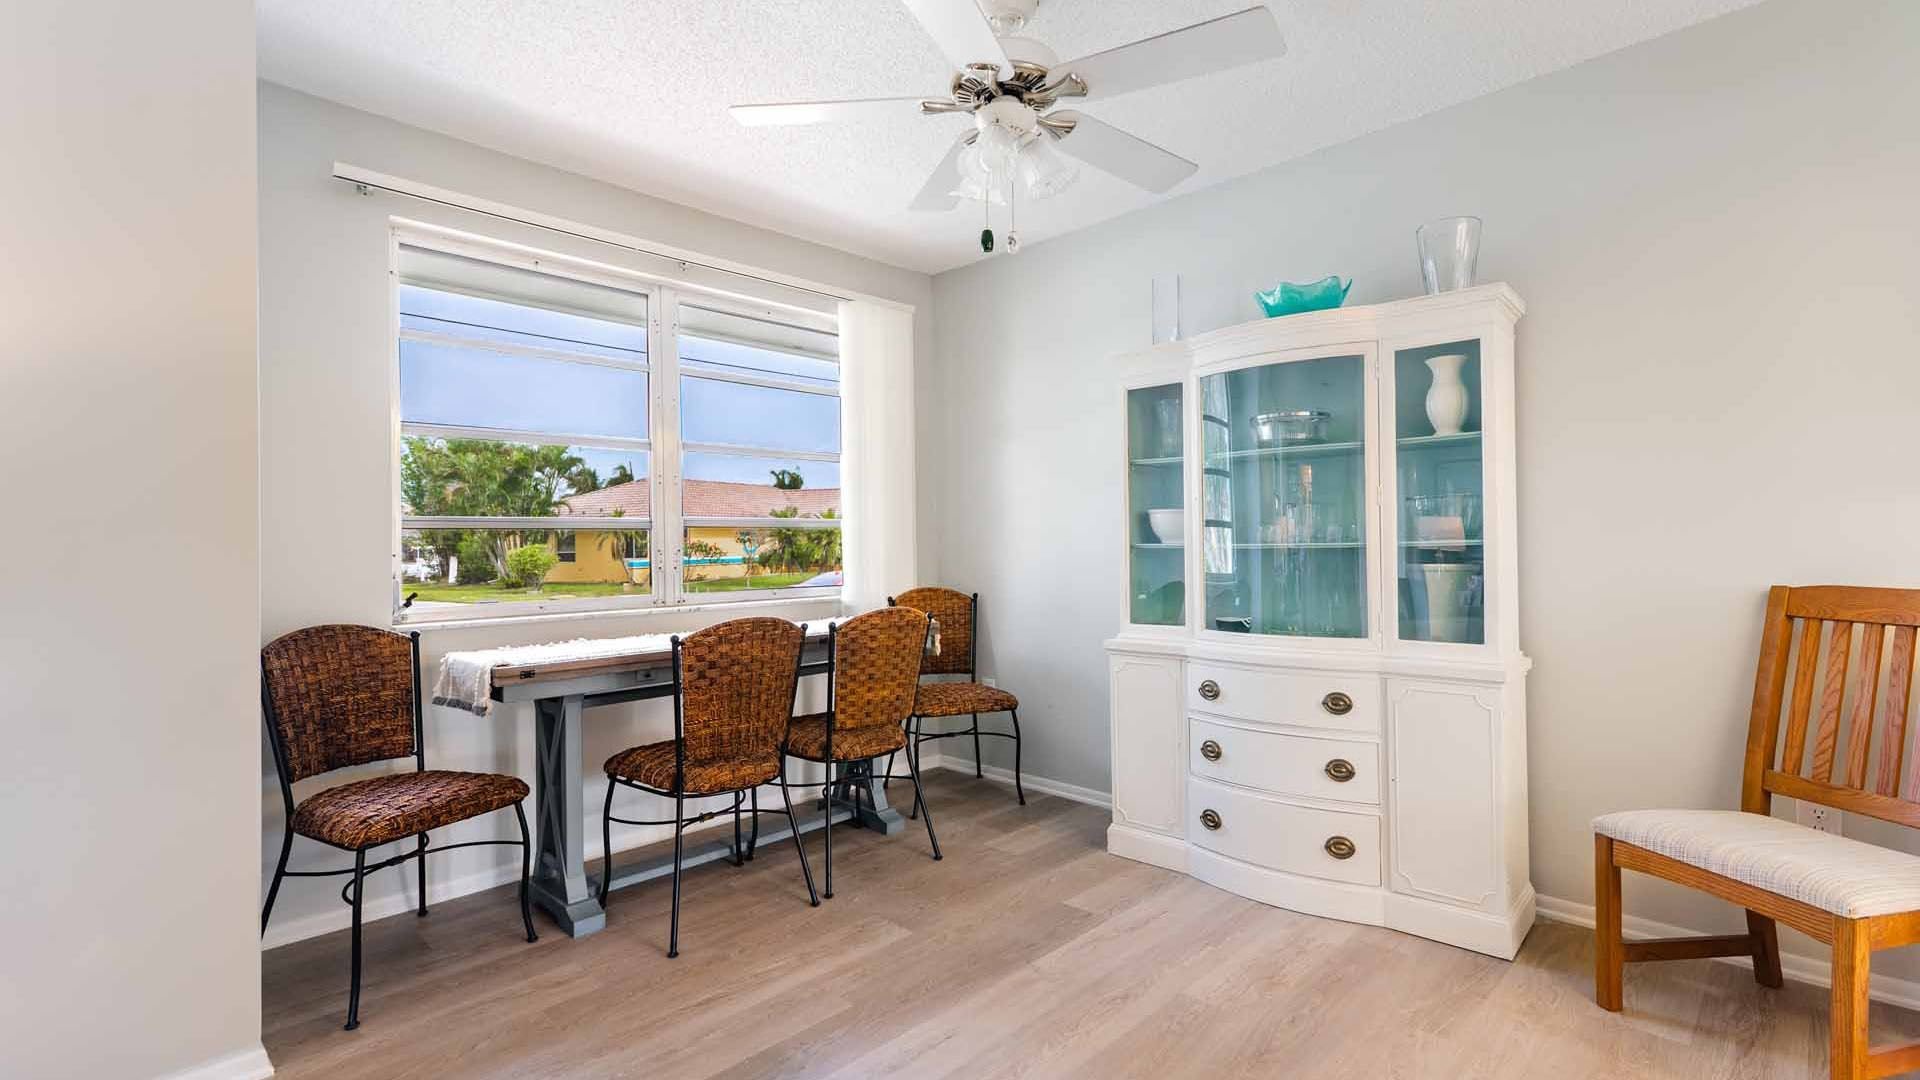 Dining area with table that can be moved and used a desk